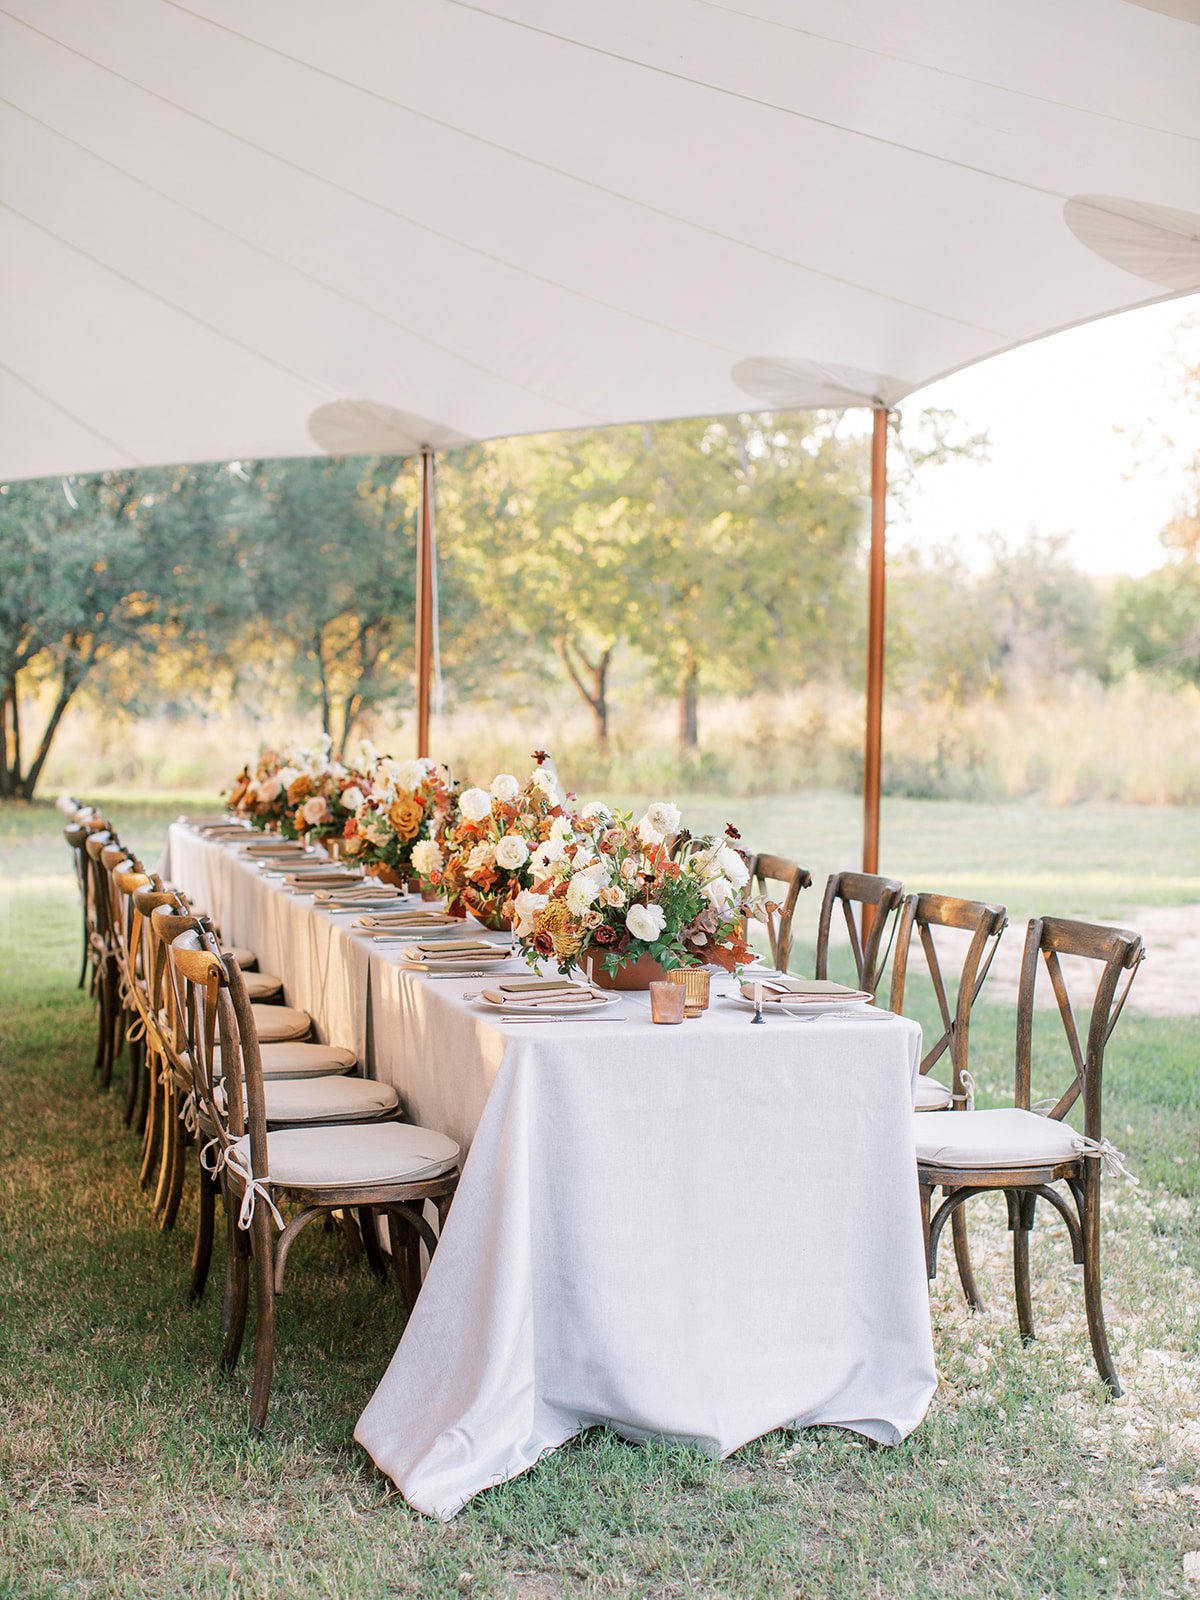 Sailcloth wedding reception designed by Shannon Rose Events